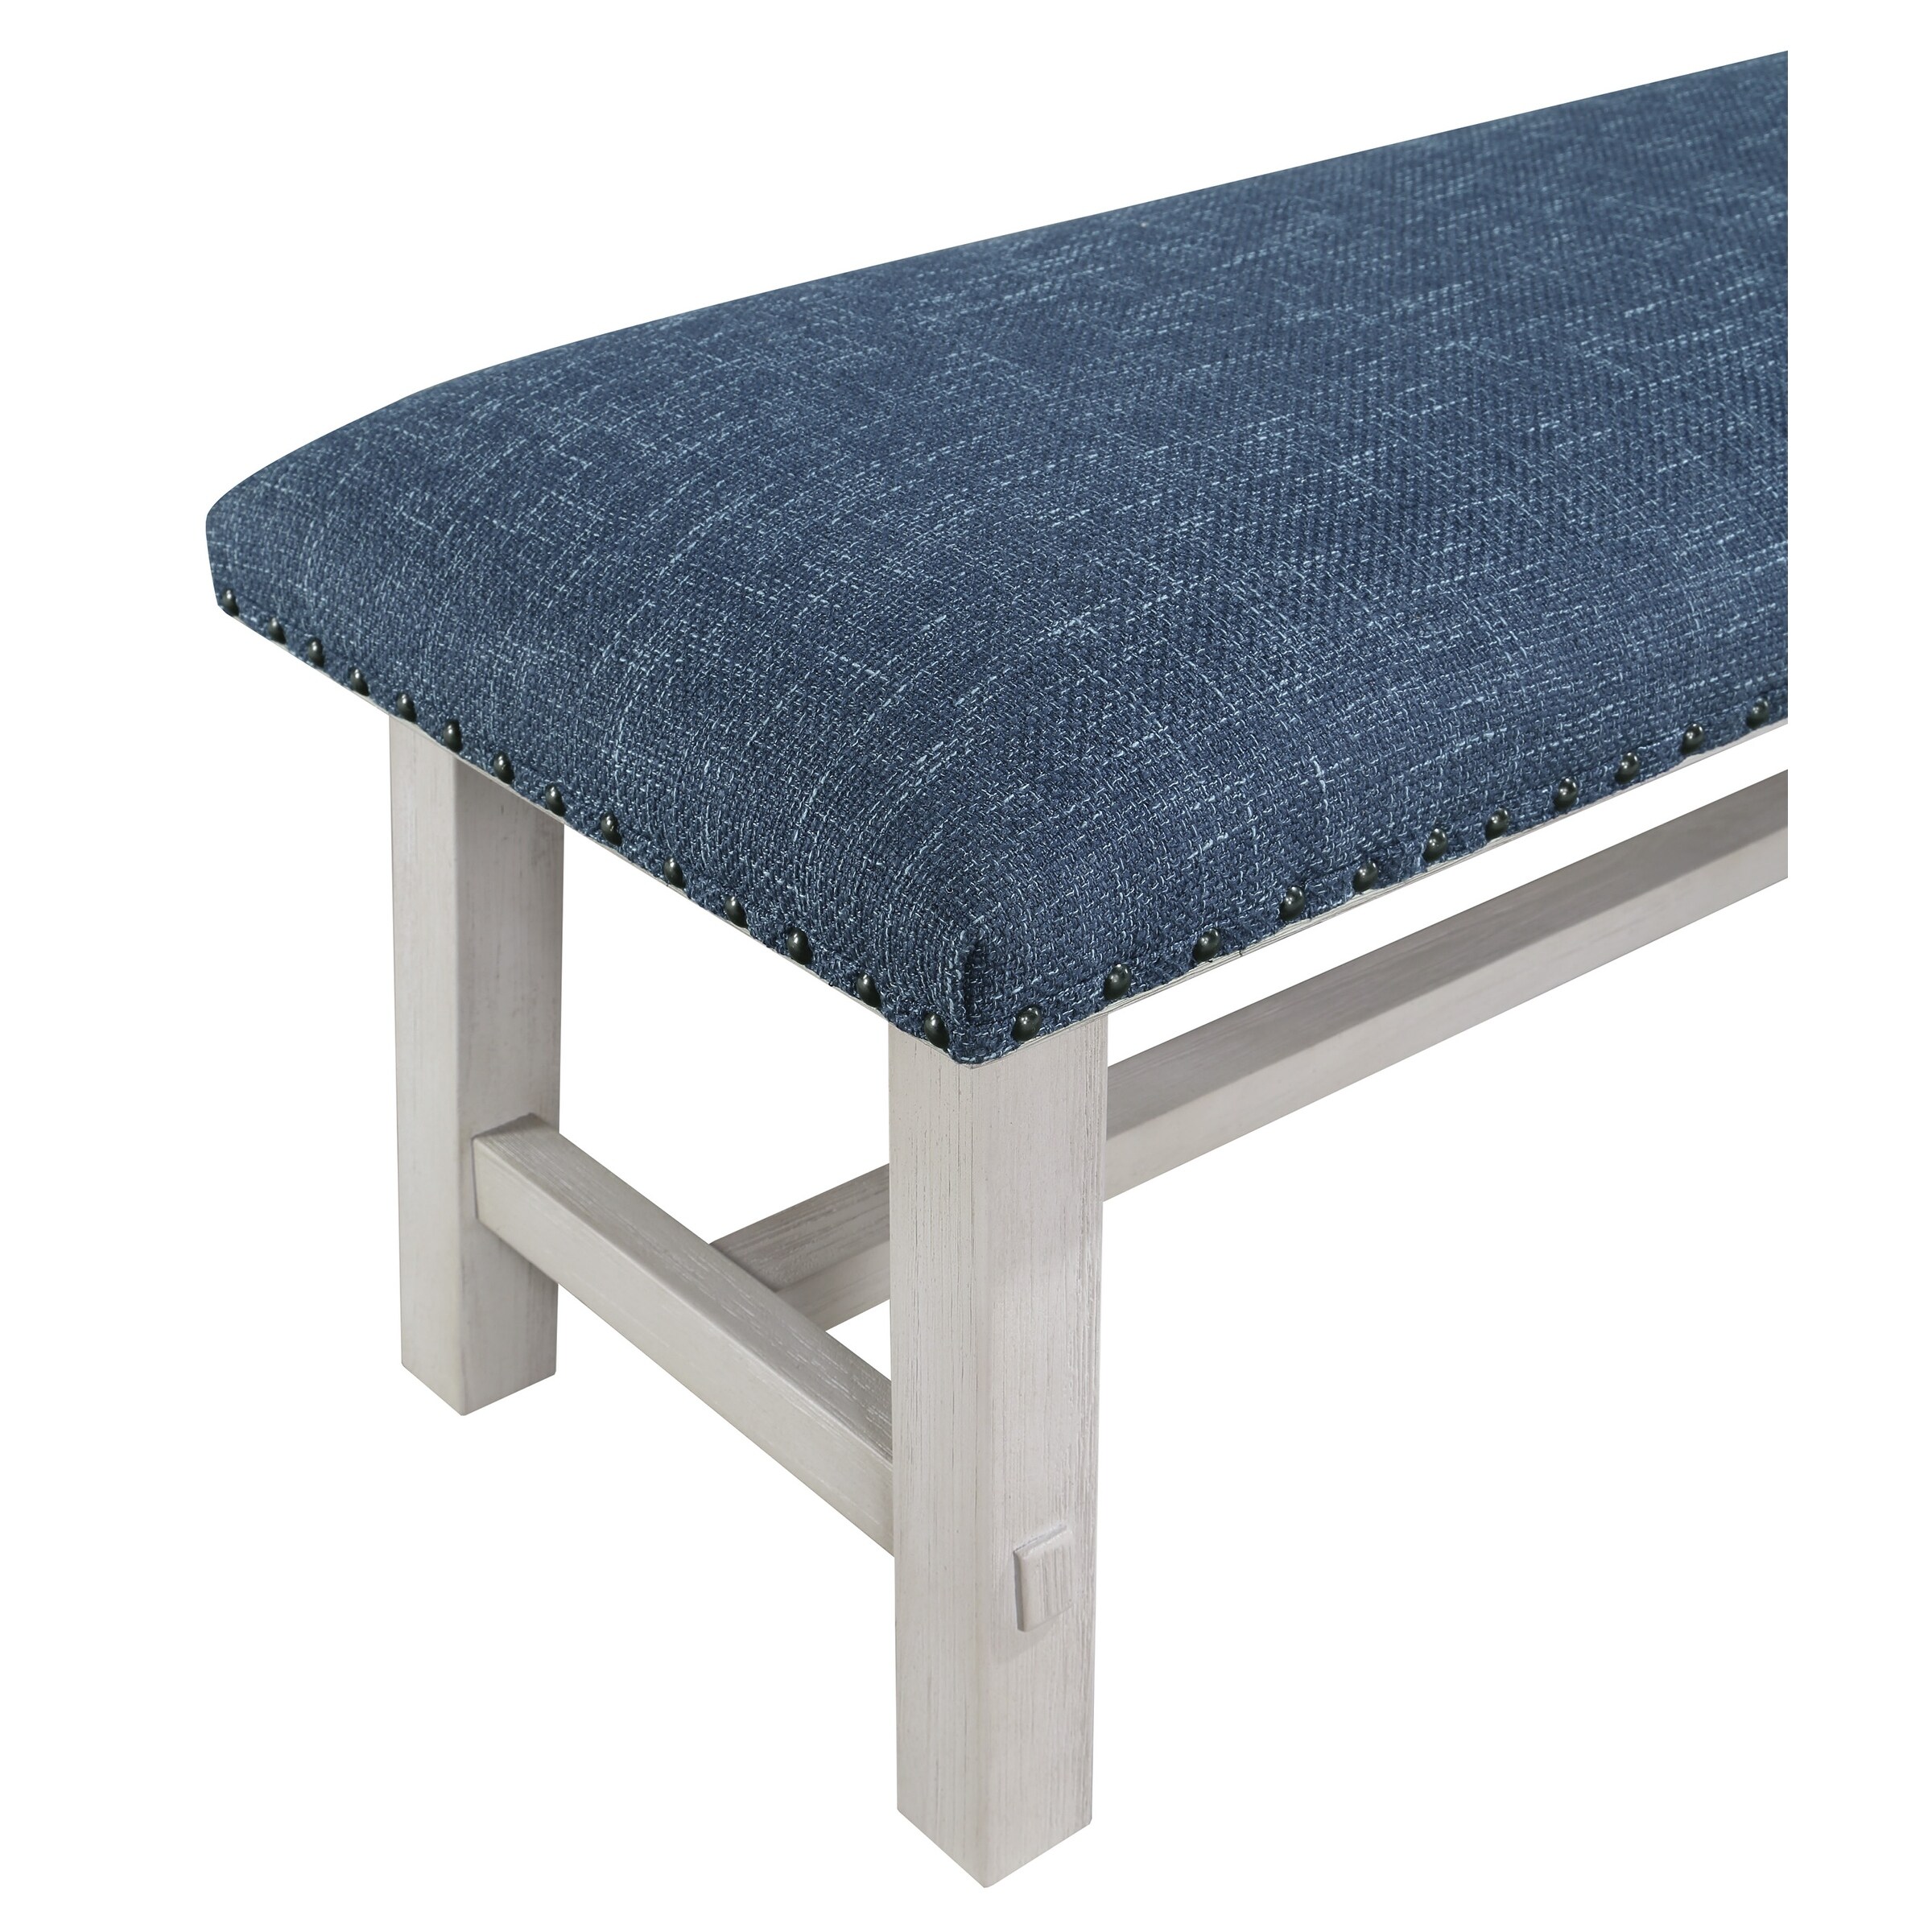 OS Home and Office Furniture Callen Bench with White Wash Frame and Antique Bronze Nailhead Trim in Navy Fabric